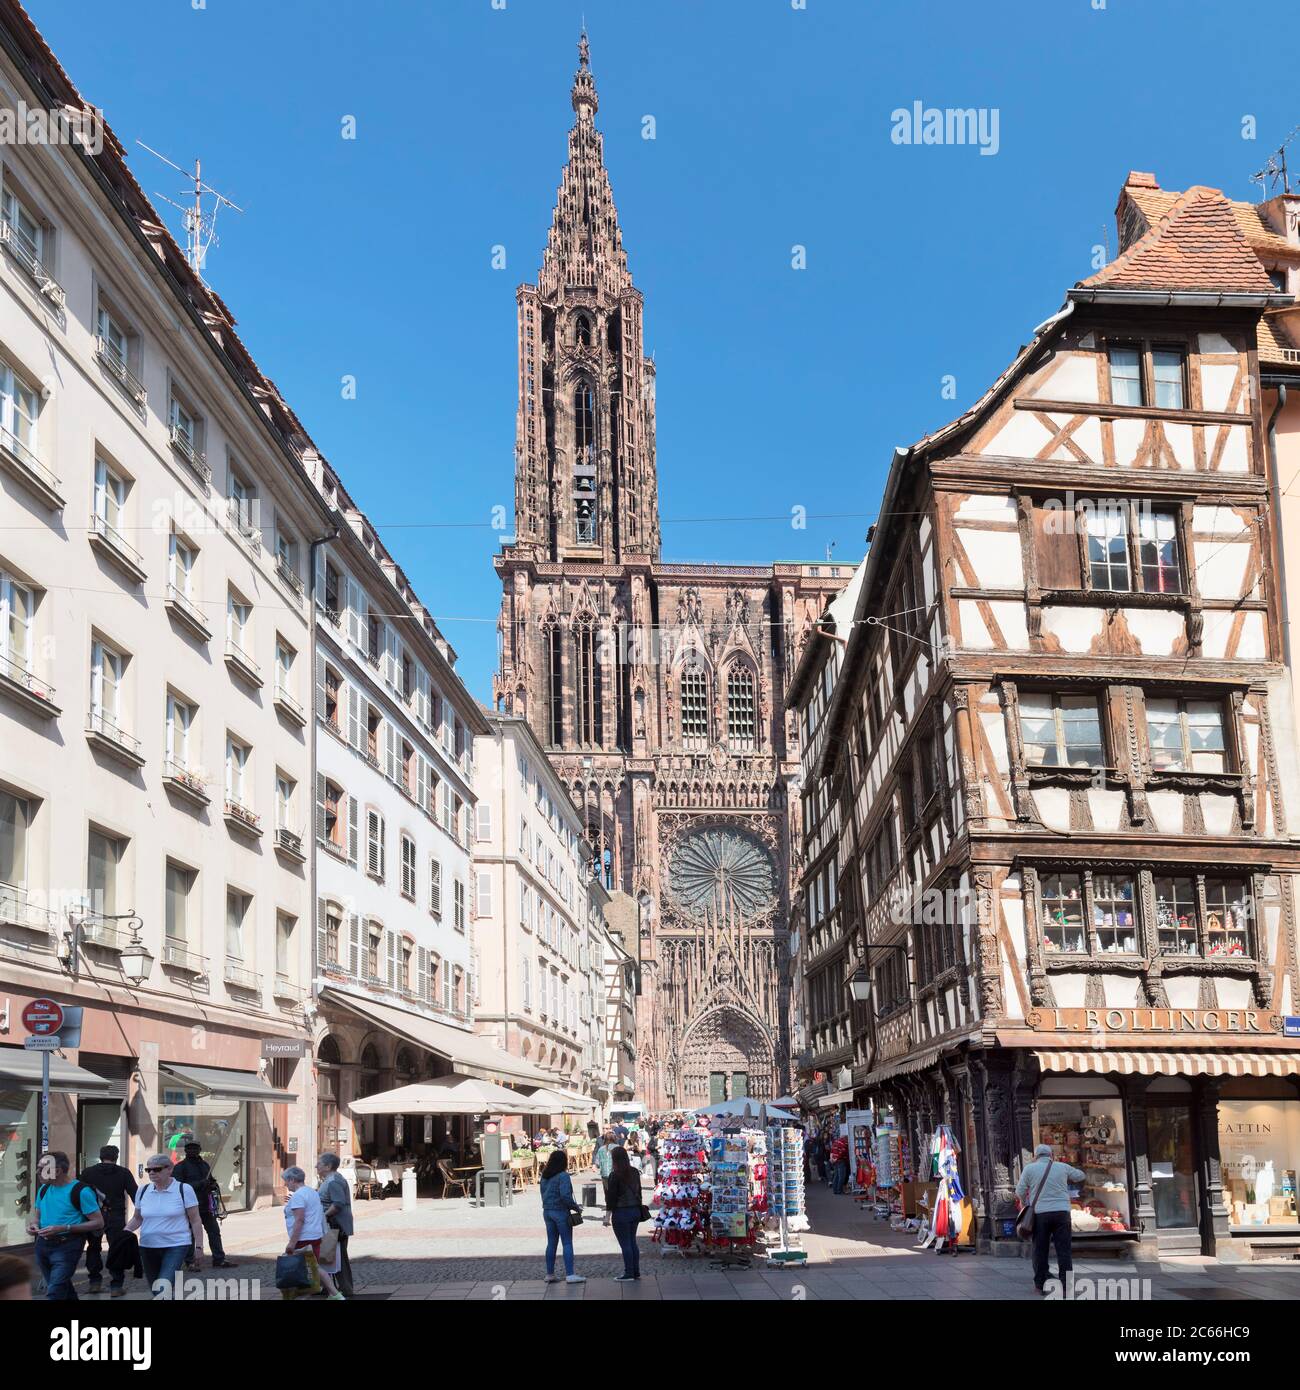 Cathedral of Our Lady of Strasbourg, UNESCO World Heritage Site, Strasbourg, Alsace, Grand Est Region, France Stock Photo